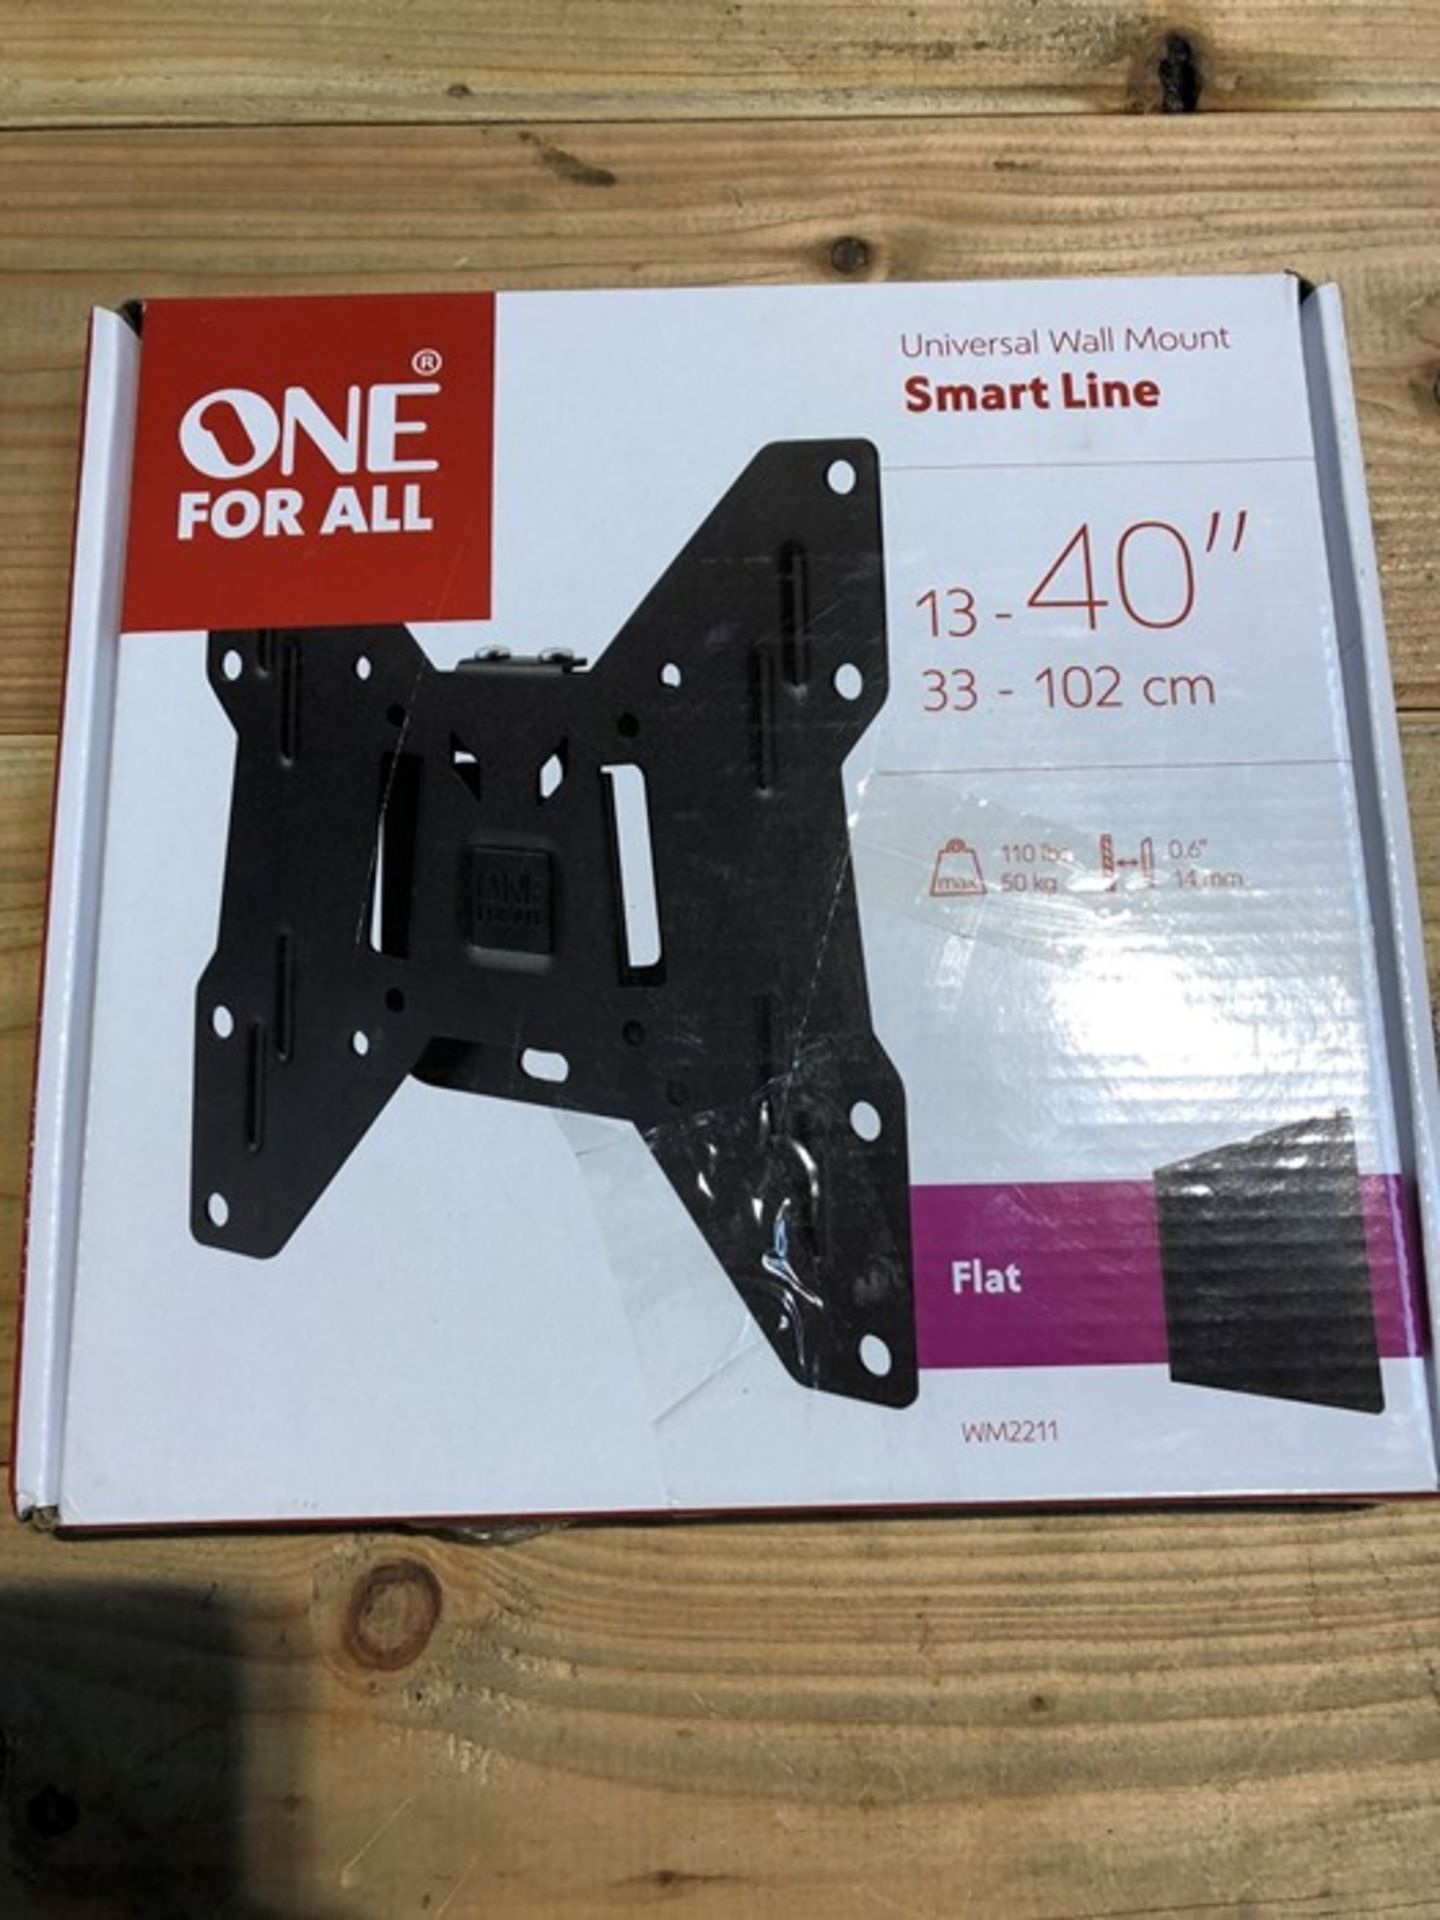 1 BOXED ONE FOR ALL UNIVERSAL WALL MOUNT SMART LINE FLAT - WM2211 / SIZE: 13-40" OR 33 - 102CM /